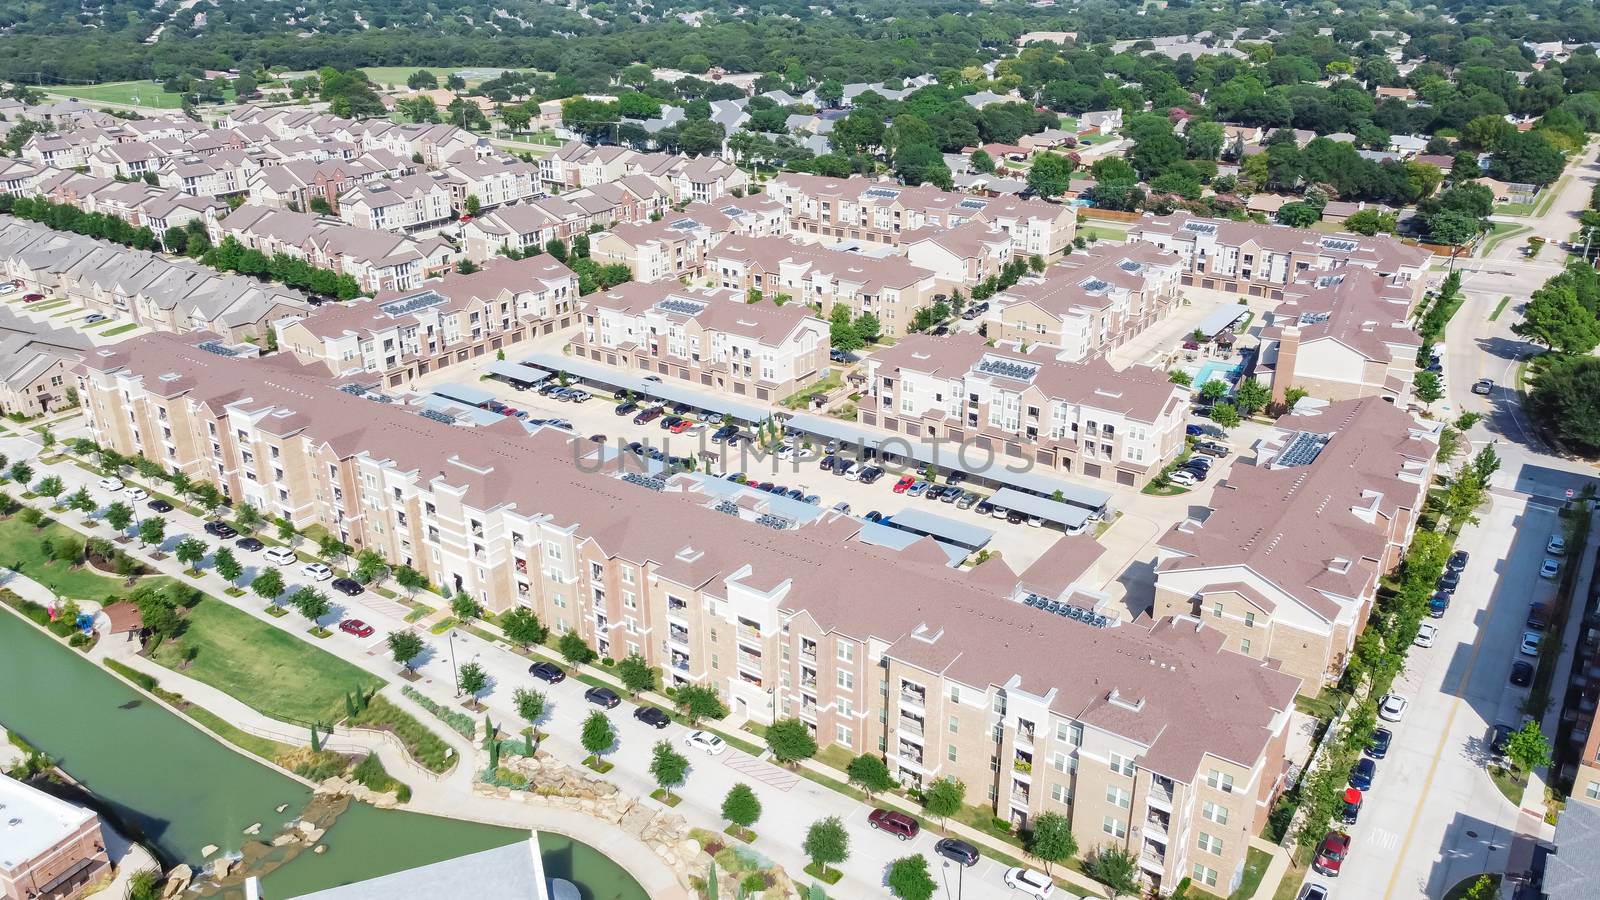 Brand new multistory apartment complex with covered parking lots and suburban residential area in background. Master-planned community and census-designated sprawl in Flower Mound, TX